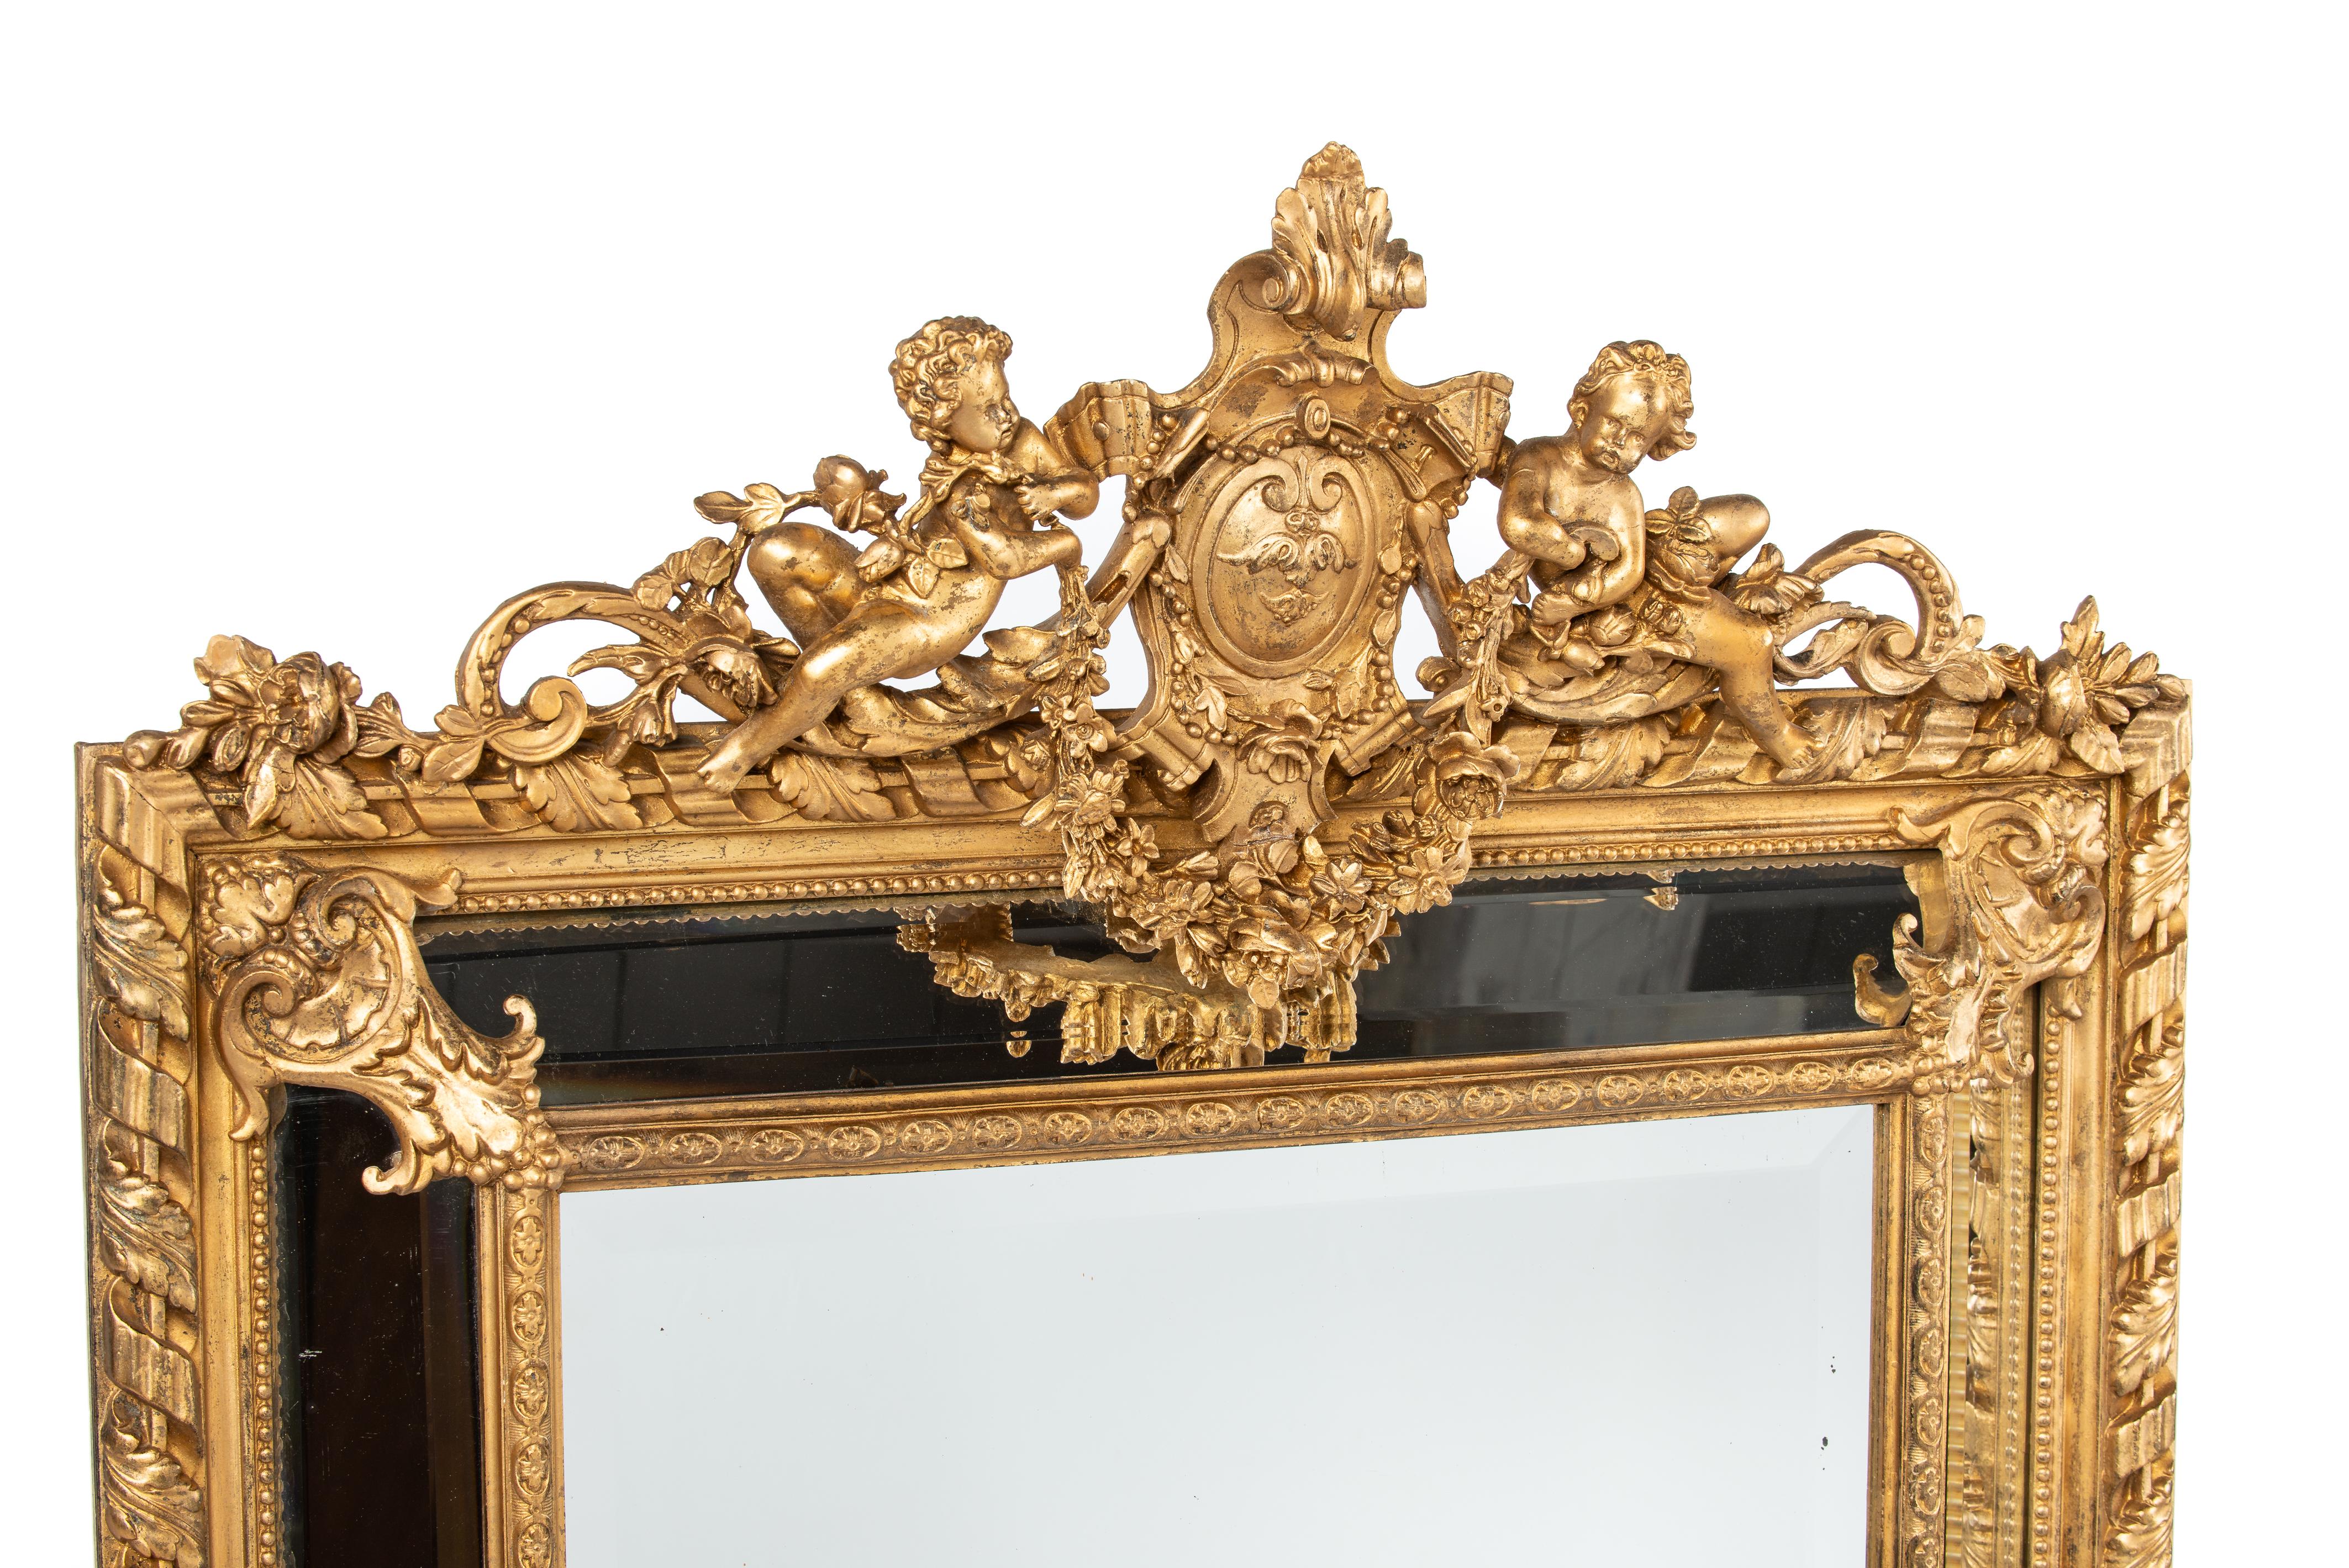 On offer here is a beautiful antique gold leaf gilt parecloses mirror that was made in France in the late 19th century, circa 1880. The shape of the mirror frame and the decorations used are typical for the Louis XVI, or Empire style. The mirror